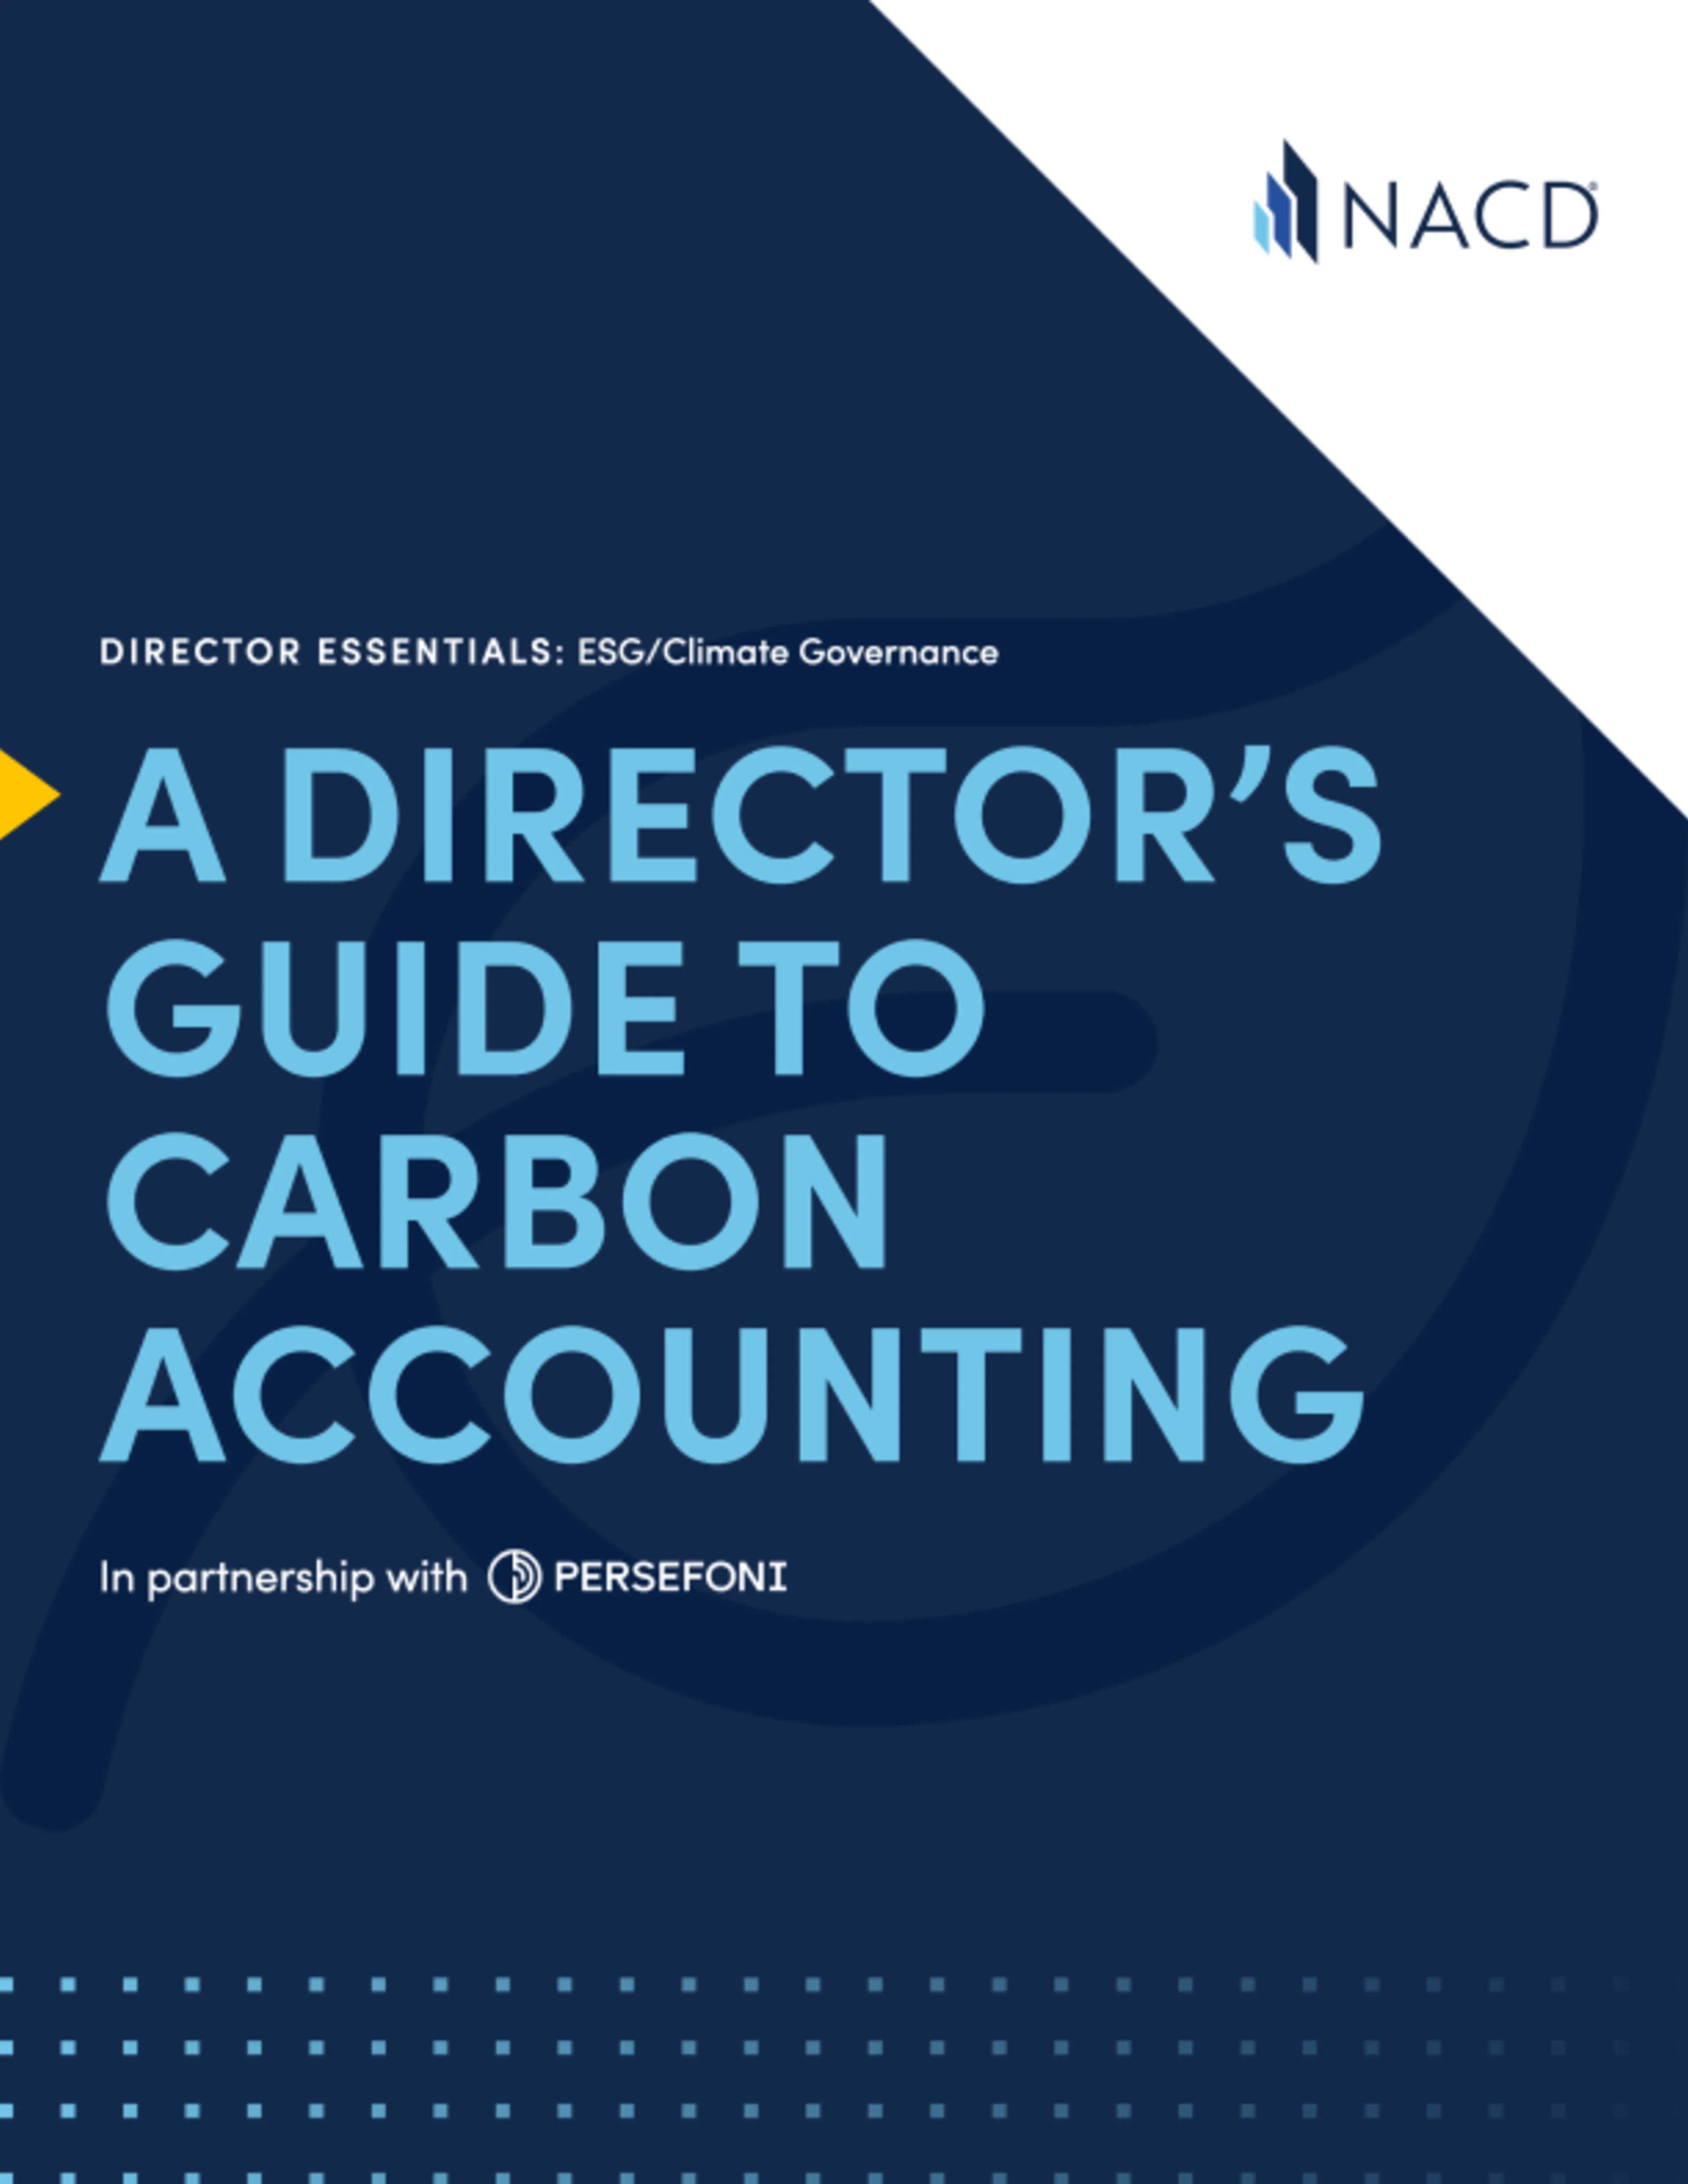 cover image for publication with text A Director's Guide to Carbon Accounting' and NACD logo